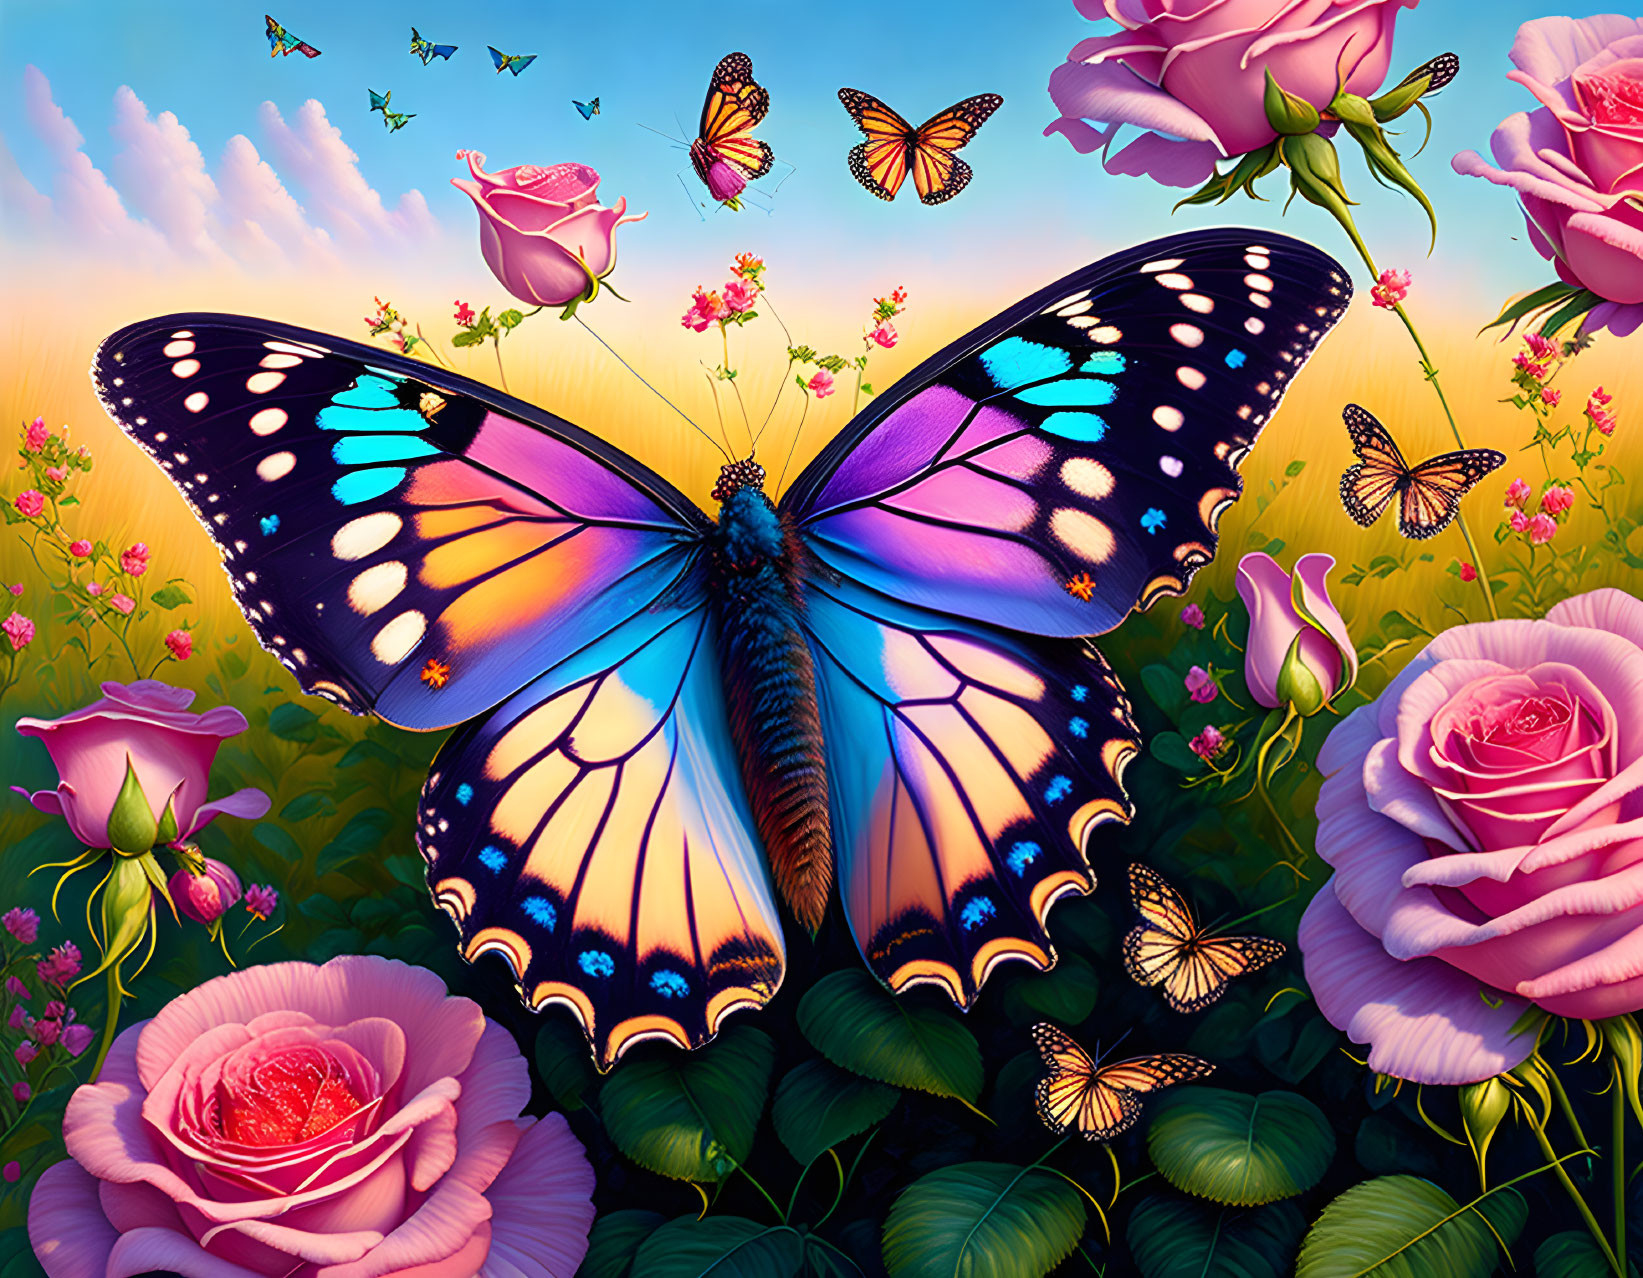 Colorful Butterfly and Roses in Pastel Sky Artwork